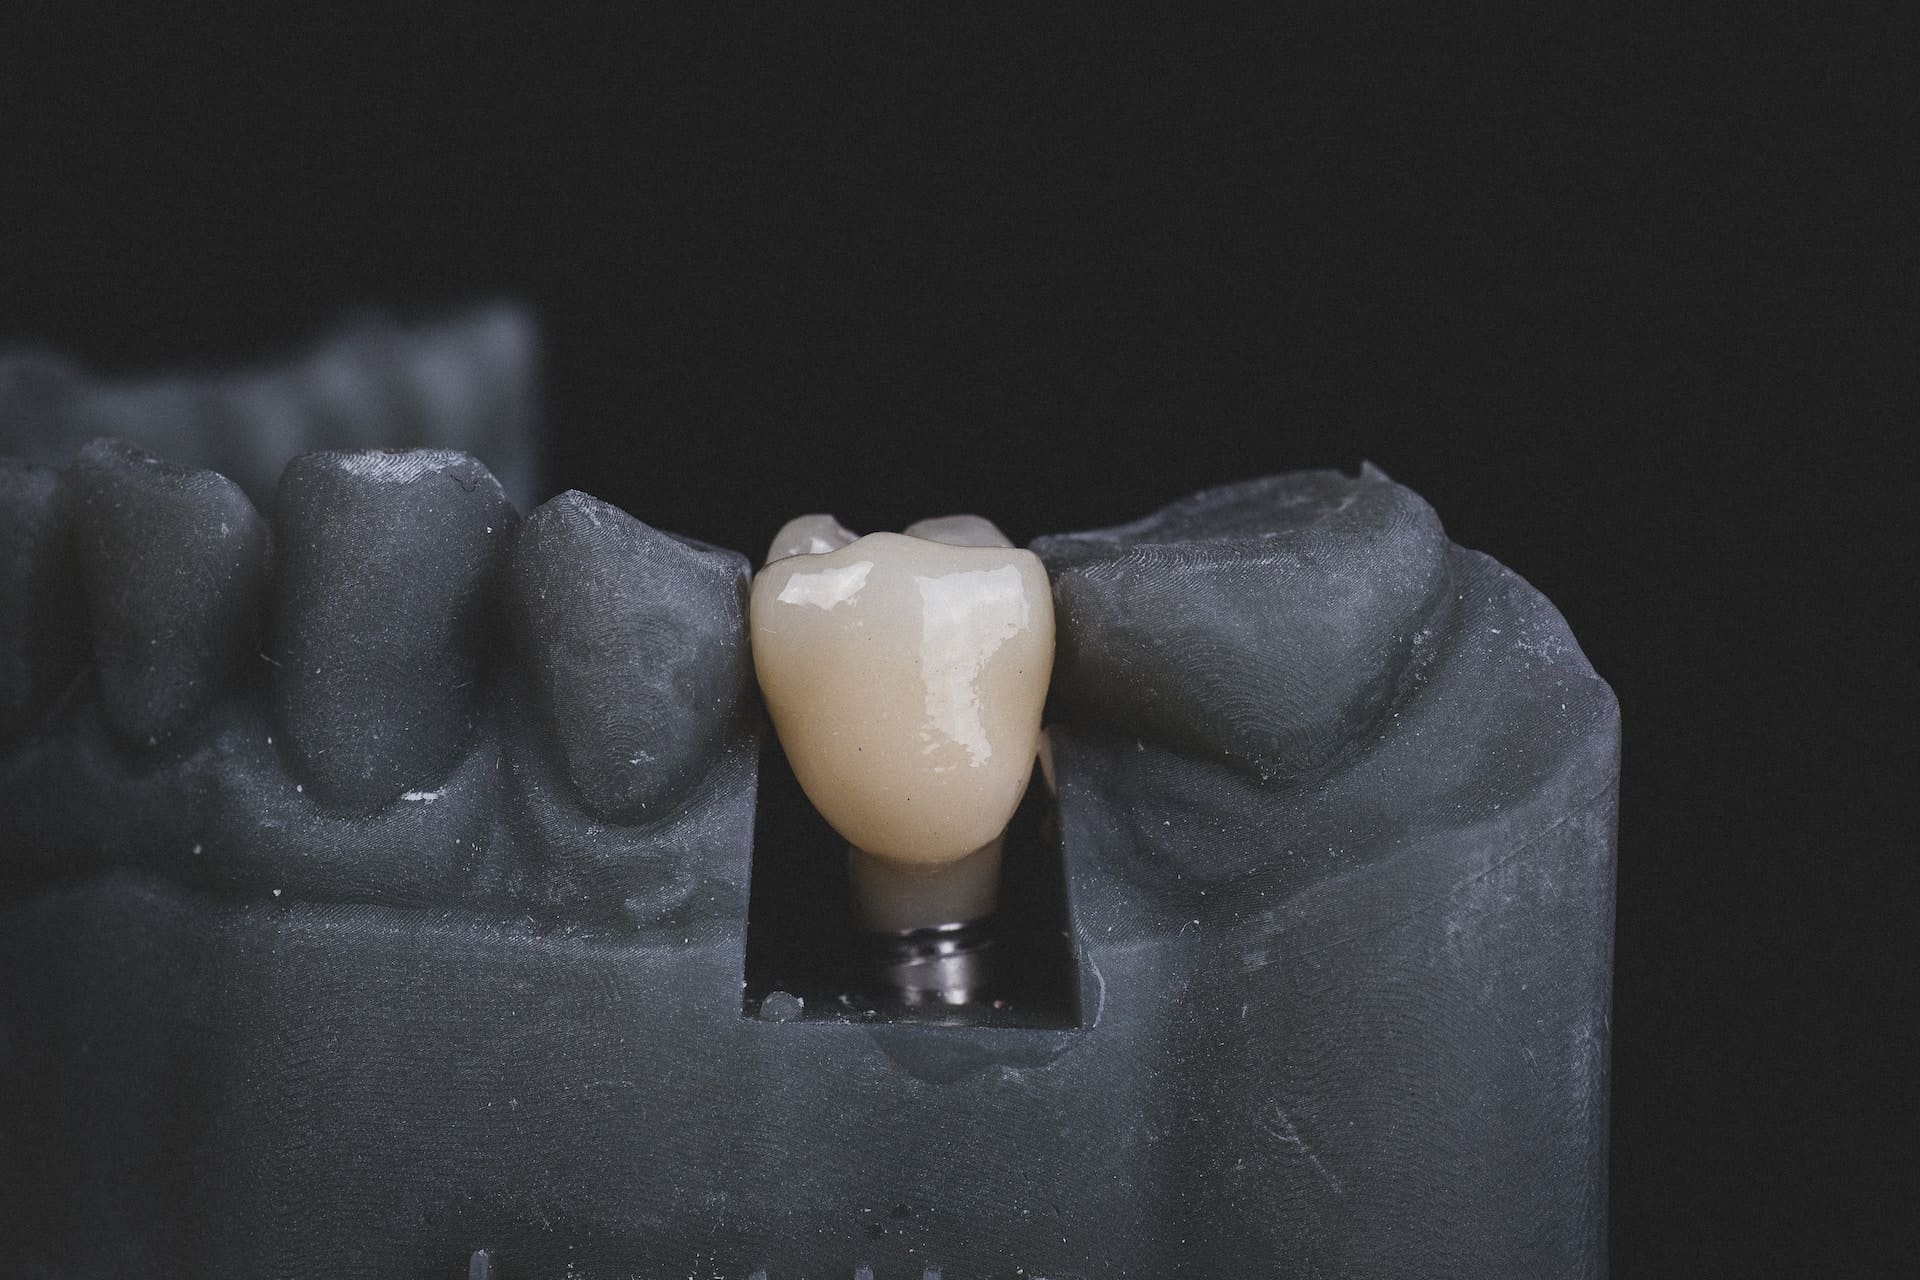 Model of dental implant on the table